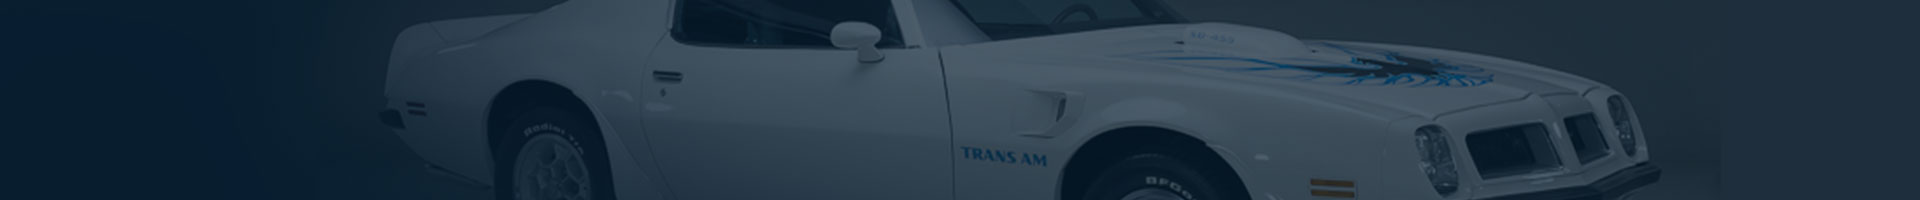 gallery Page Banner - Camaro